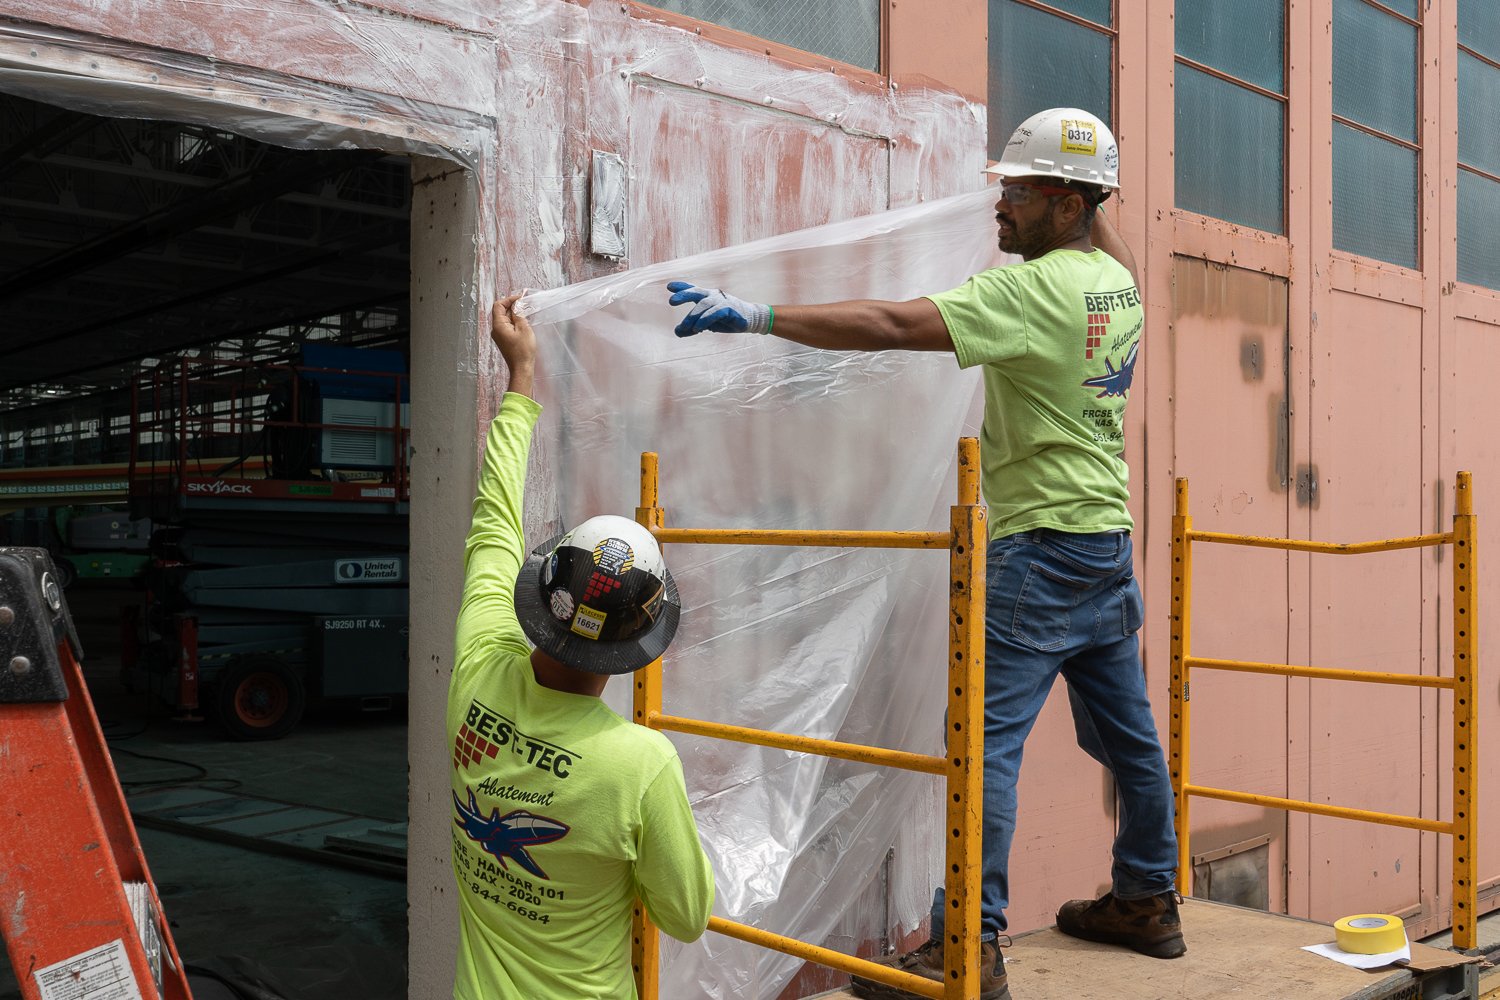 Workers affix a polyethylene sheet so that the paint stripper does not dry out and to reduce exposure of lead paint.